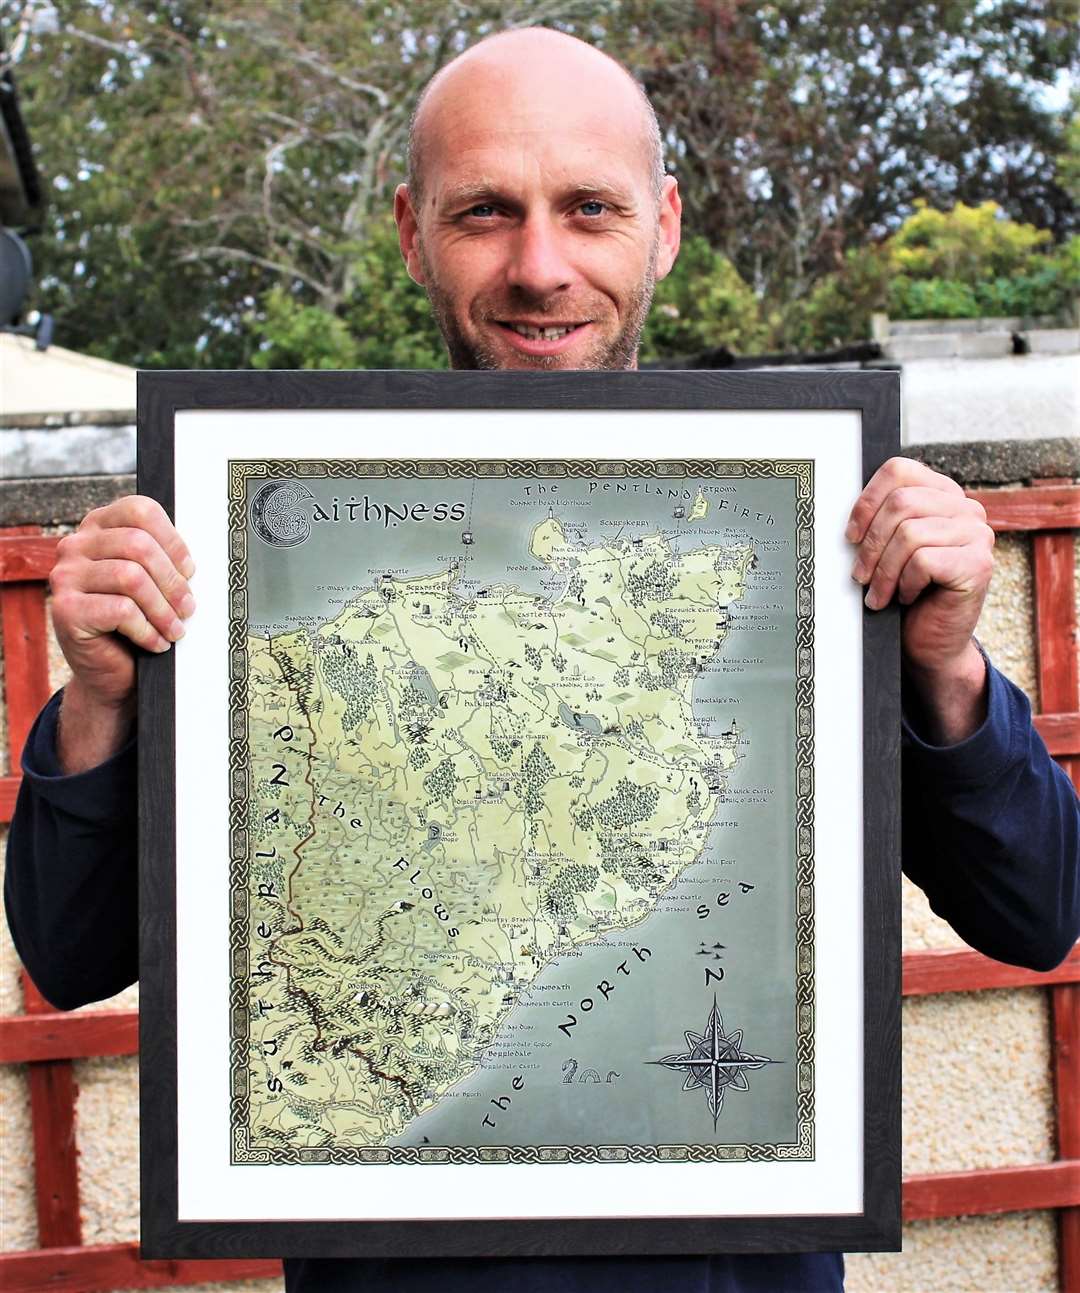 Iain Maclean, co-director of Caithness Broch Project, with the new fantasy map of Caithness.